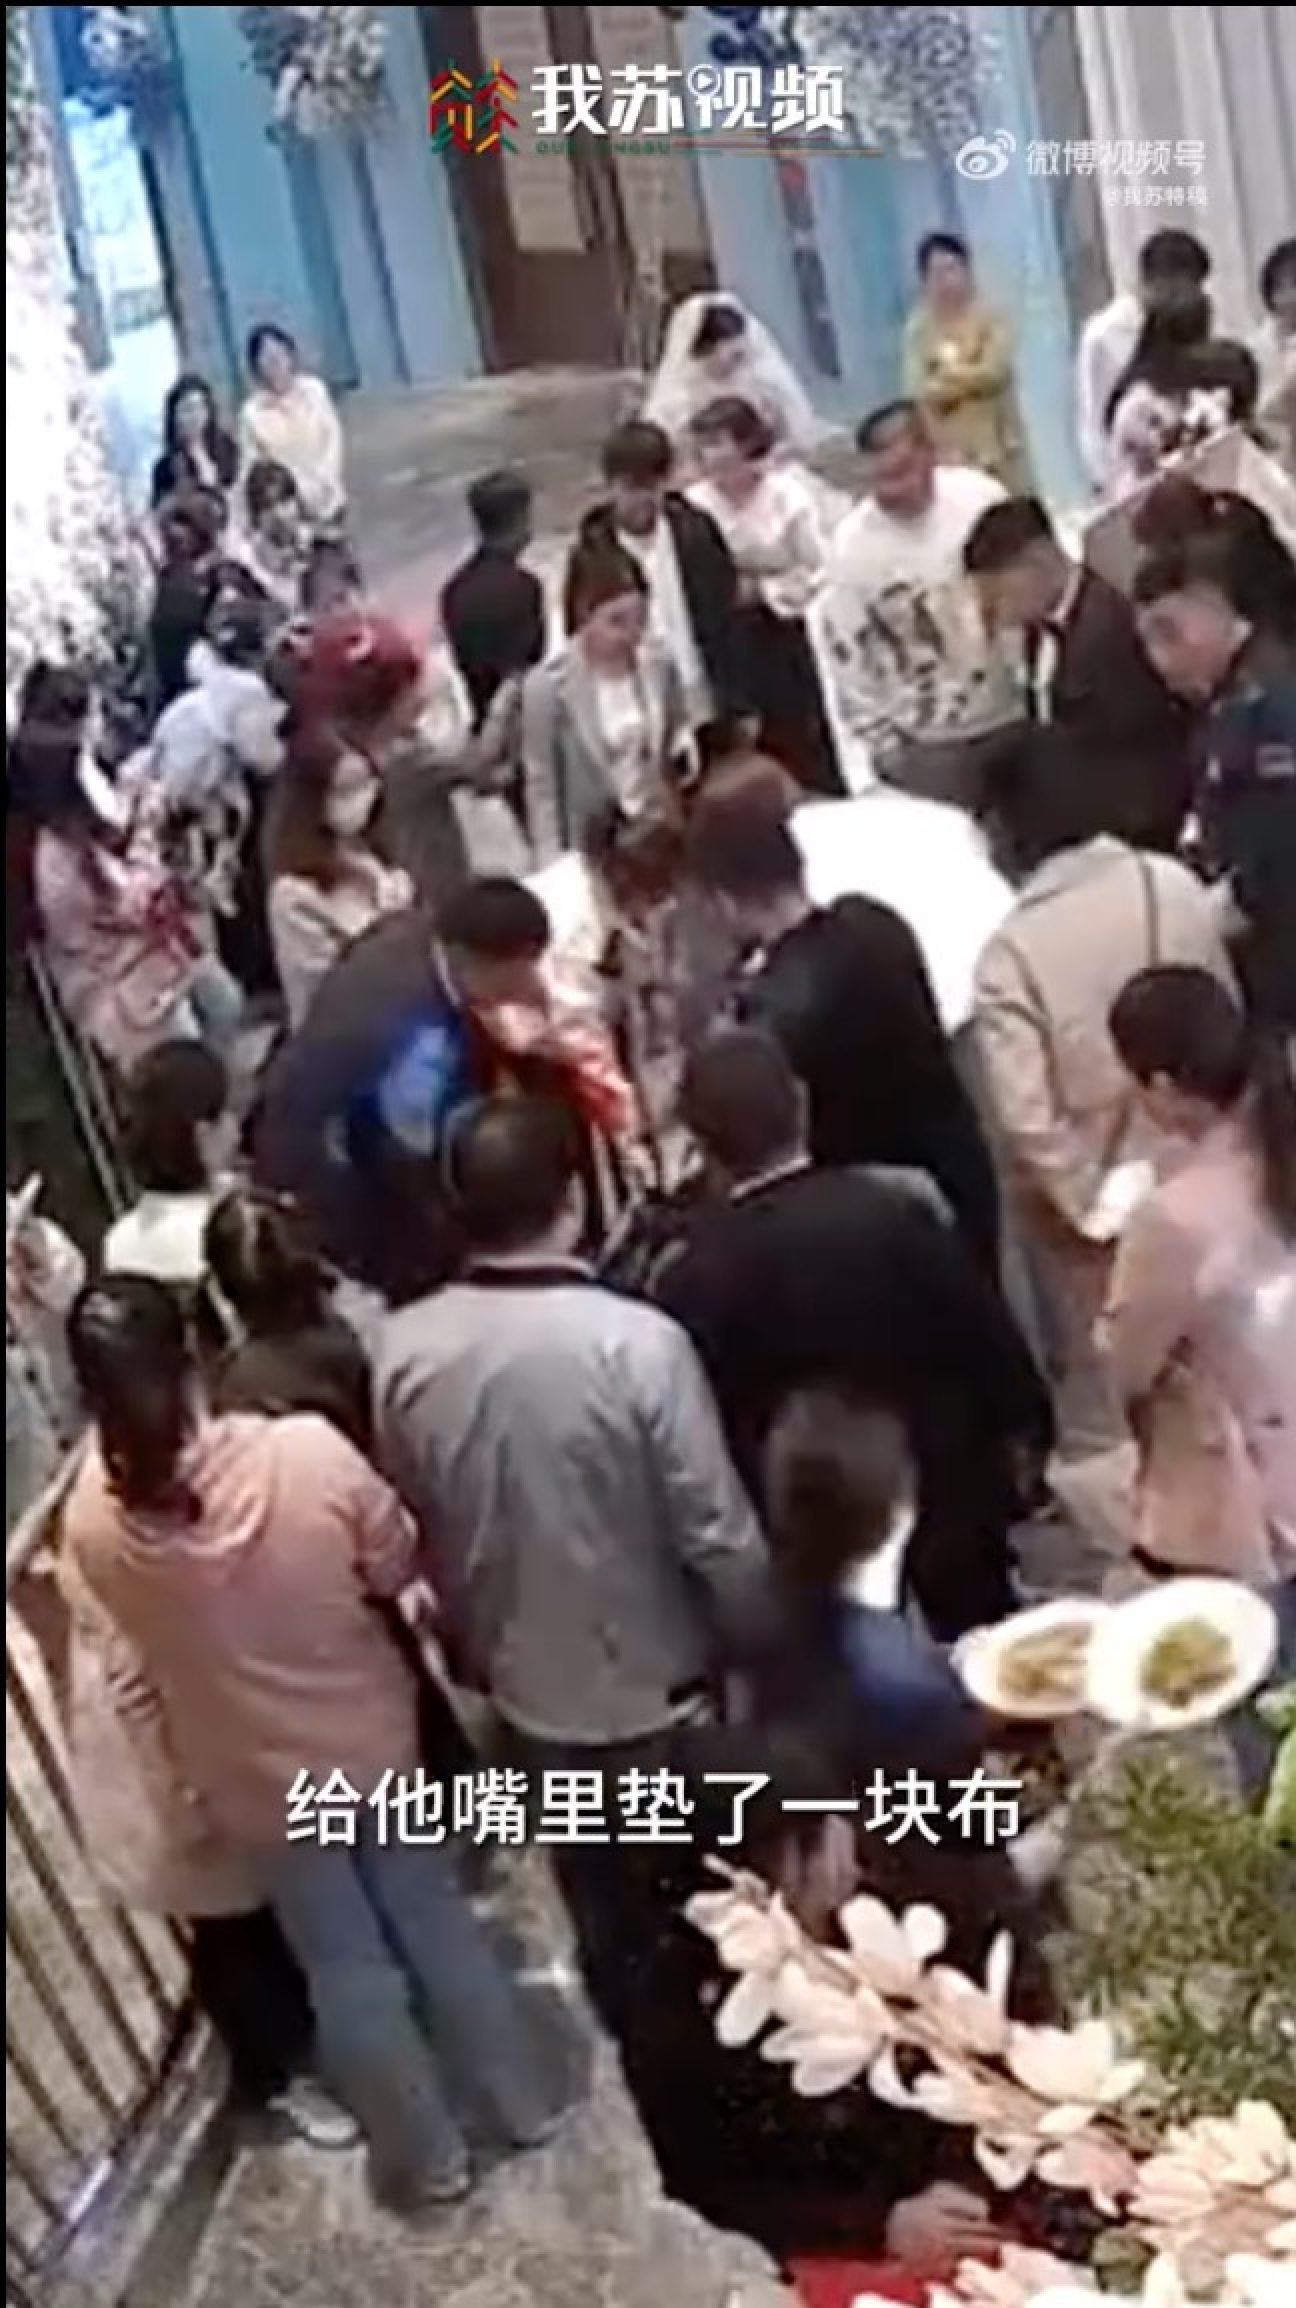 Guests at another wedding reception nearby surround the collapsed man just before the hero nurse arrived to help save him. Photo: Weibo